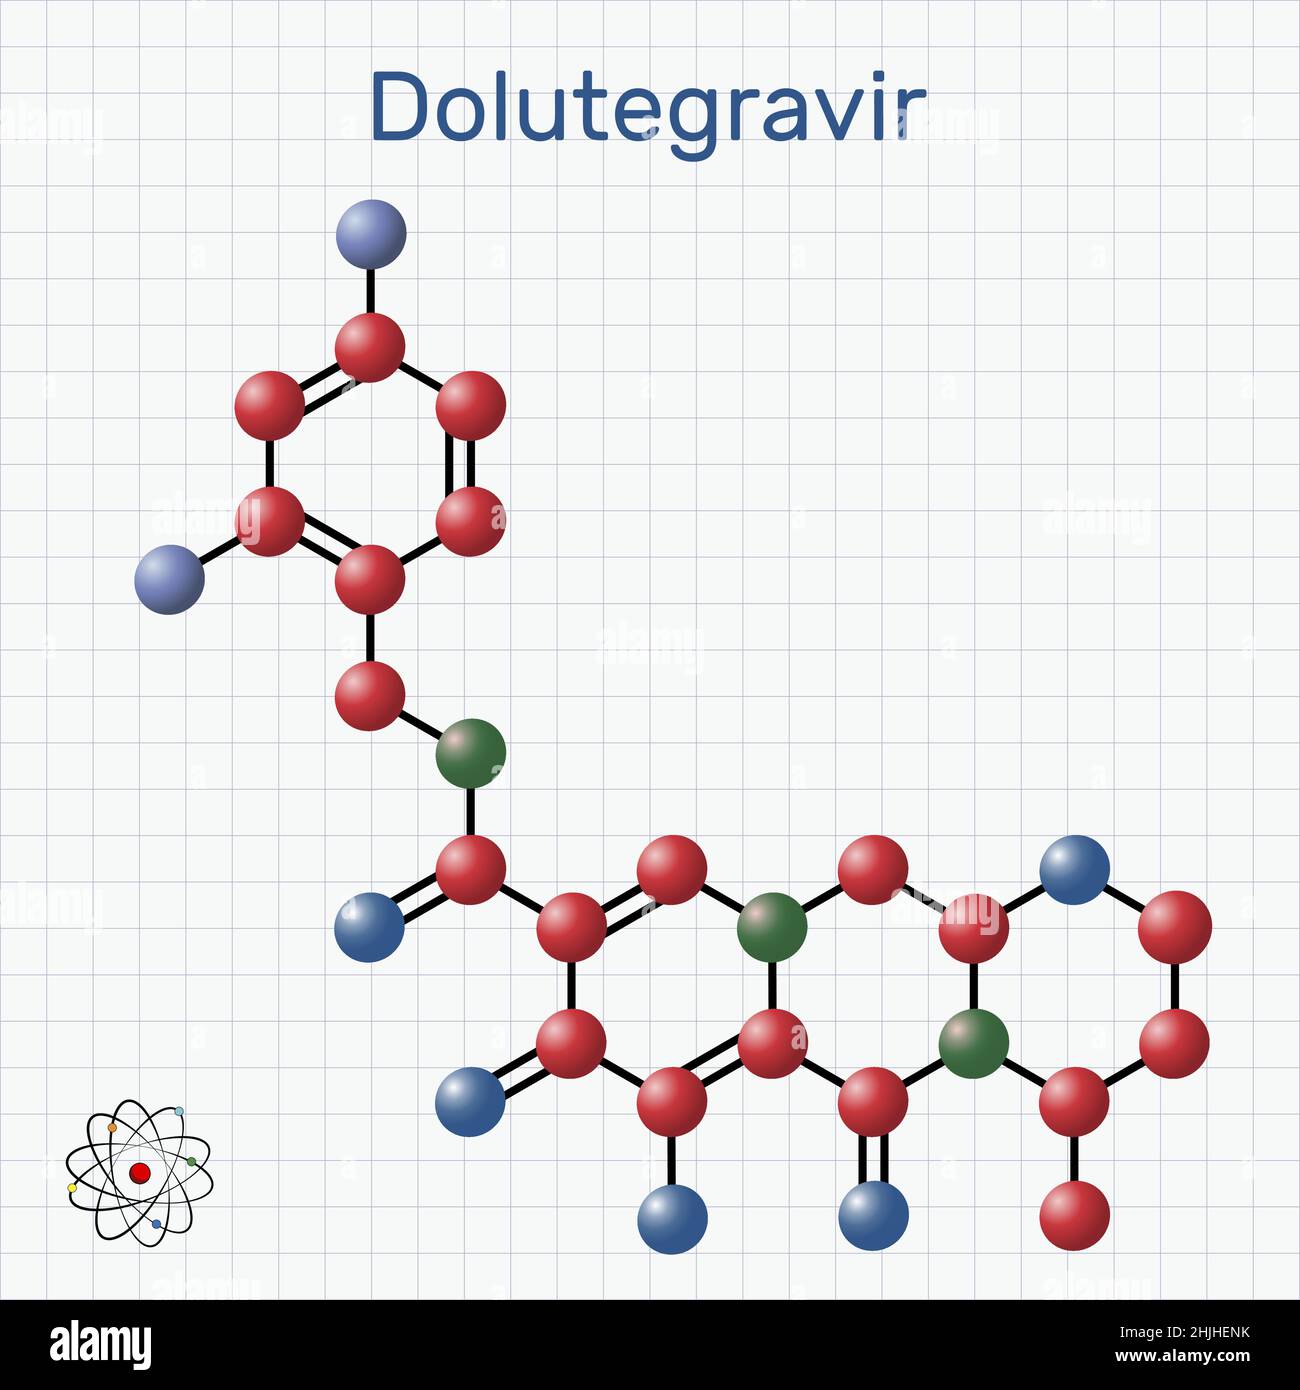 Dolutegravirе, molecule. It is antiviral agent used for the treatment of human immunodeficiency virus type 1, HIV-1 infections. Molecule model. Sheet Stock Vector